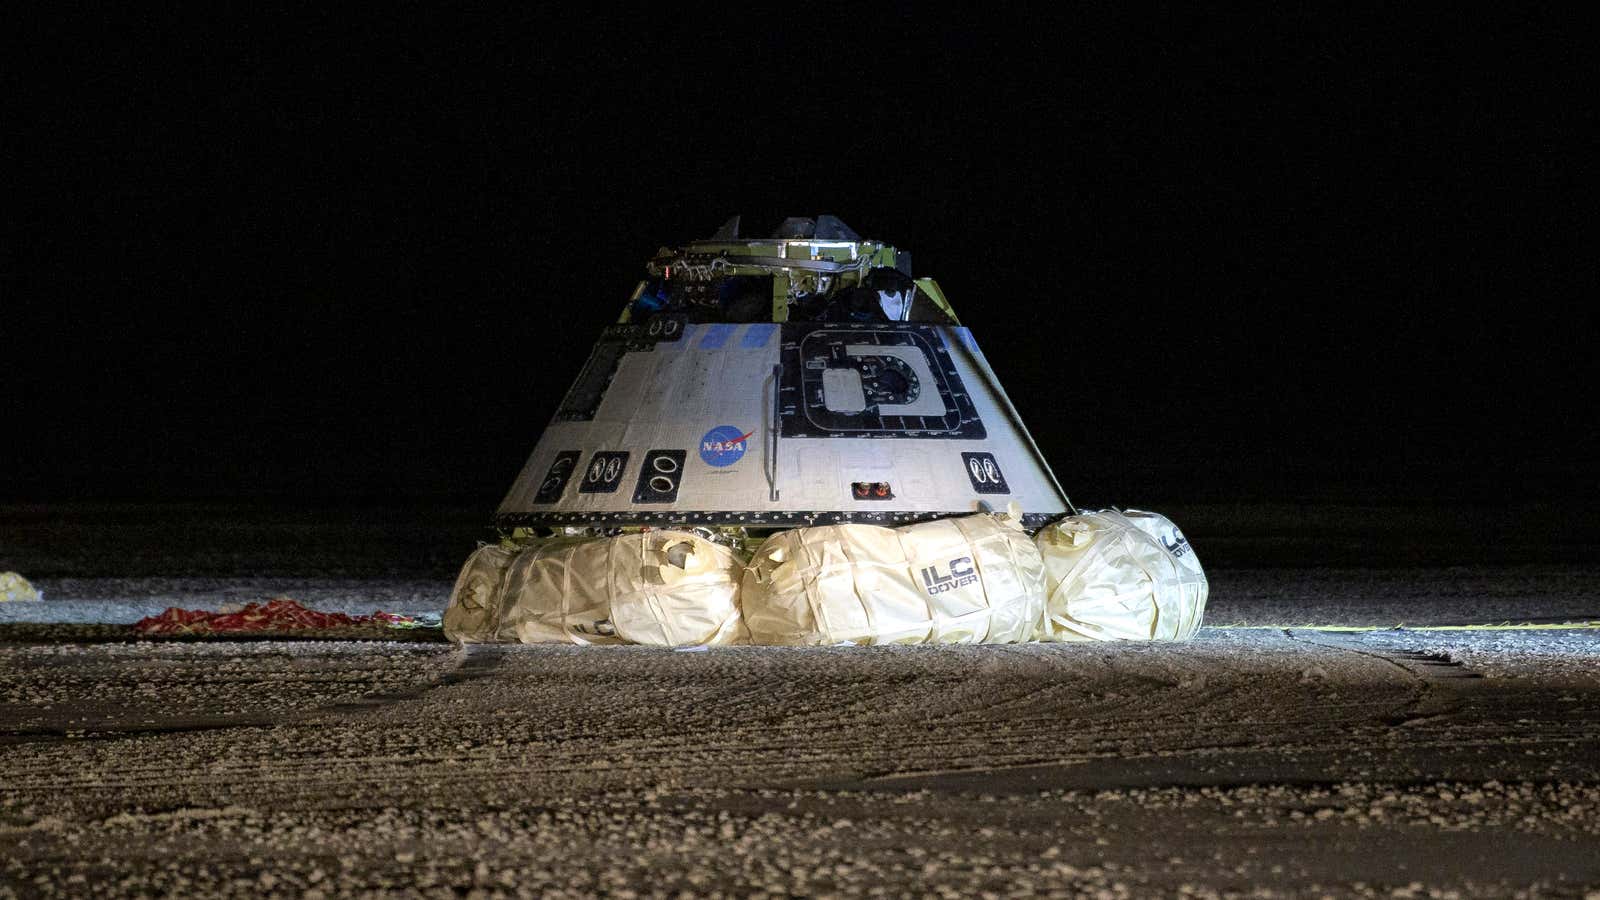 The Starliner on the ground in New Mexico after returning from its close call in orbit.